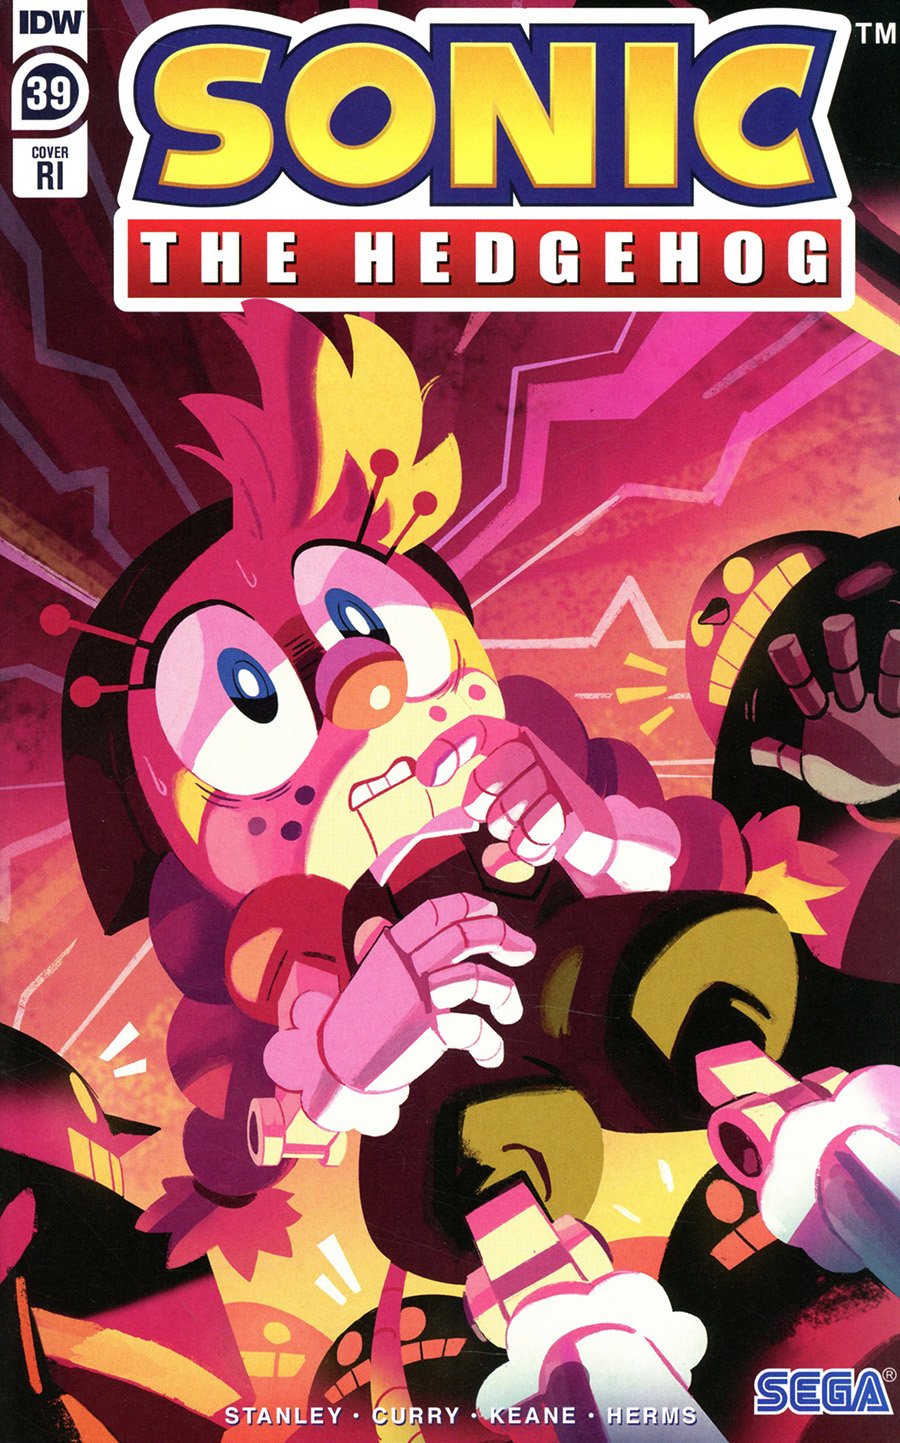 Sonic The Hedgehog Vol 3 #39 Cover C Incentive Nathalie Fourdraine Variant Cover